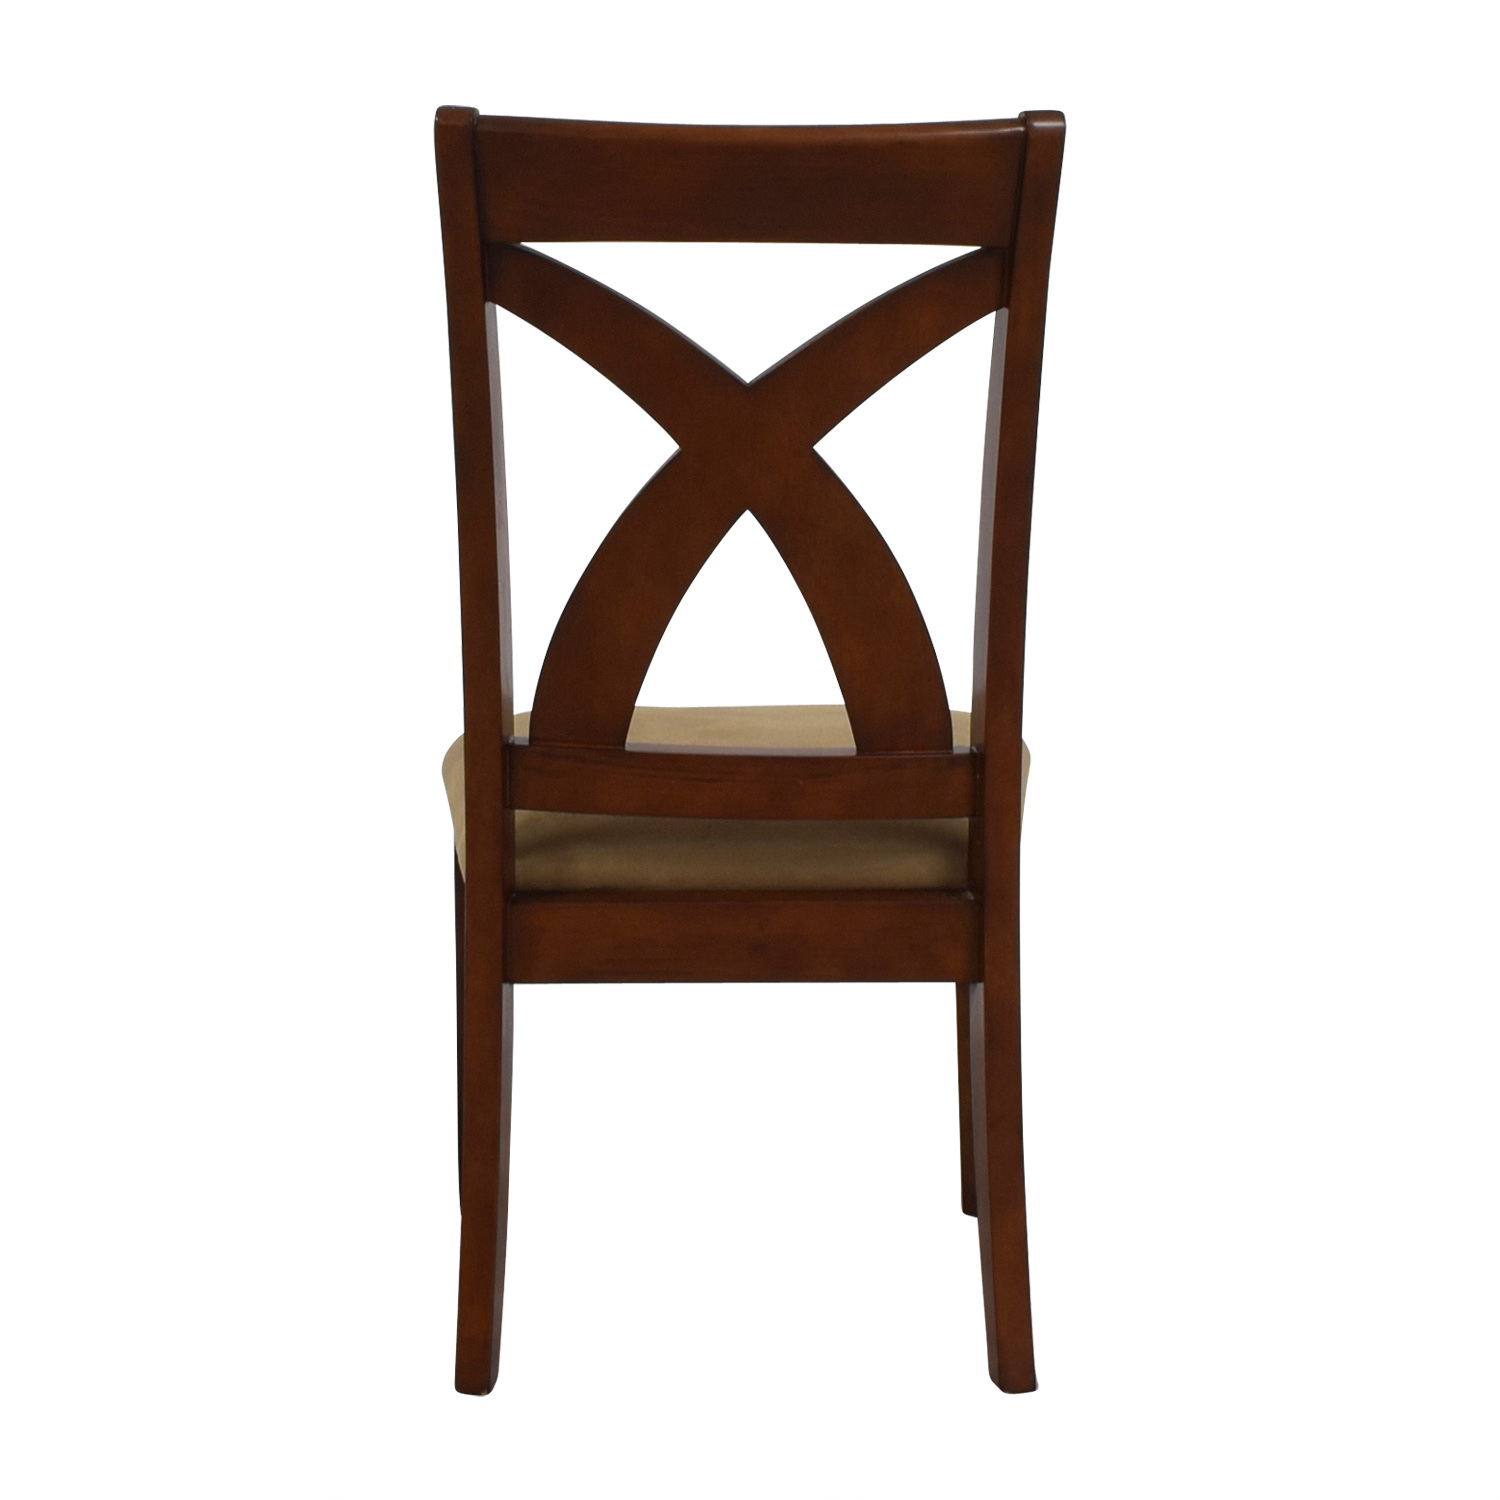 84% OFF - Solid Wood Chair with Cross Back & Padded Seat / Chairs